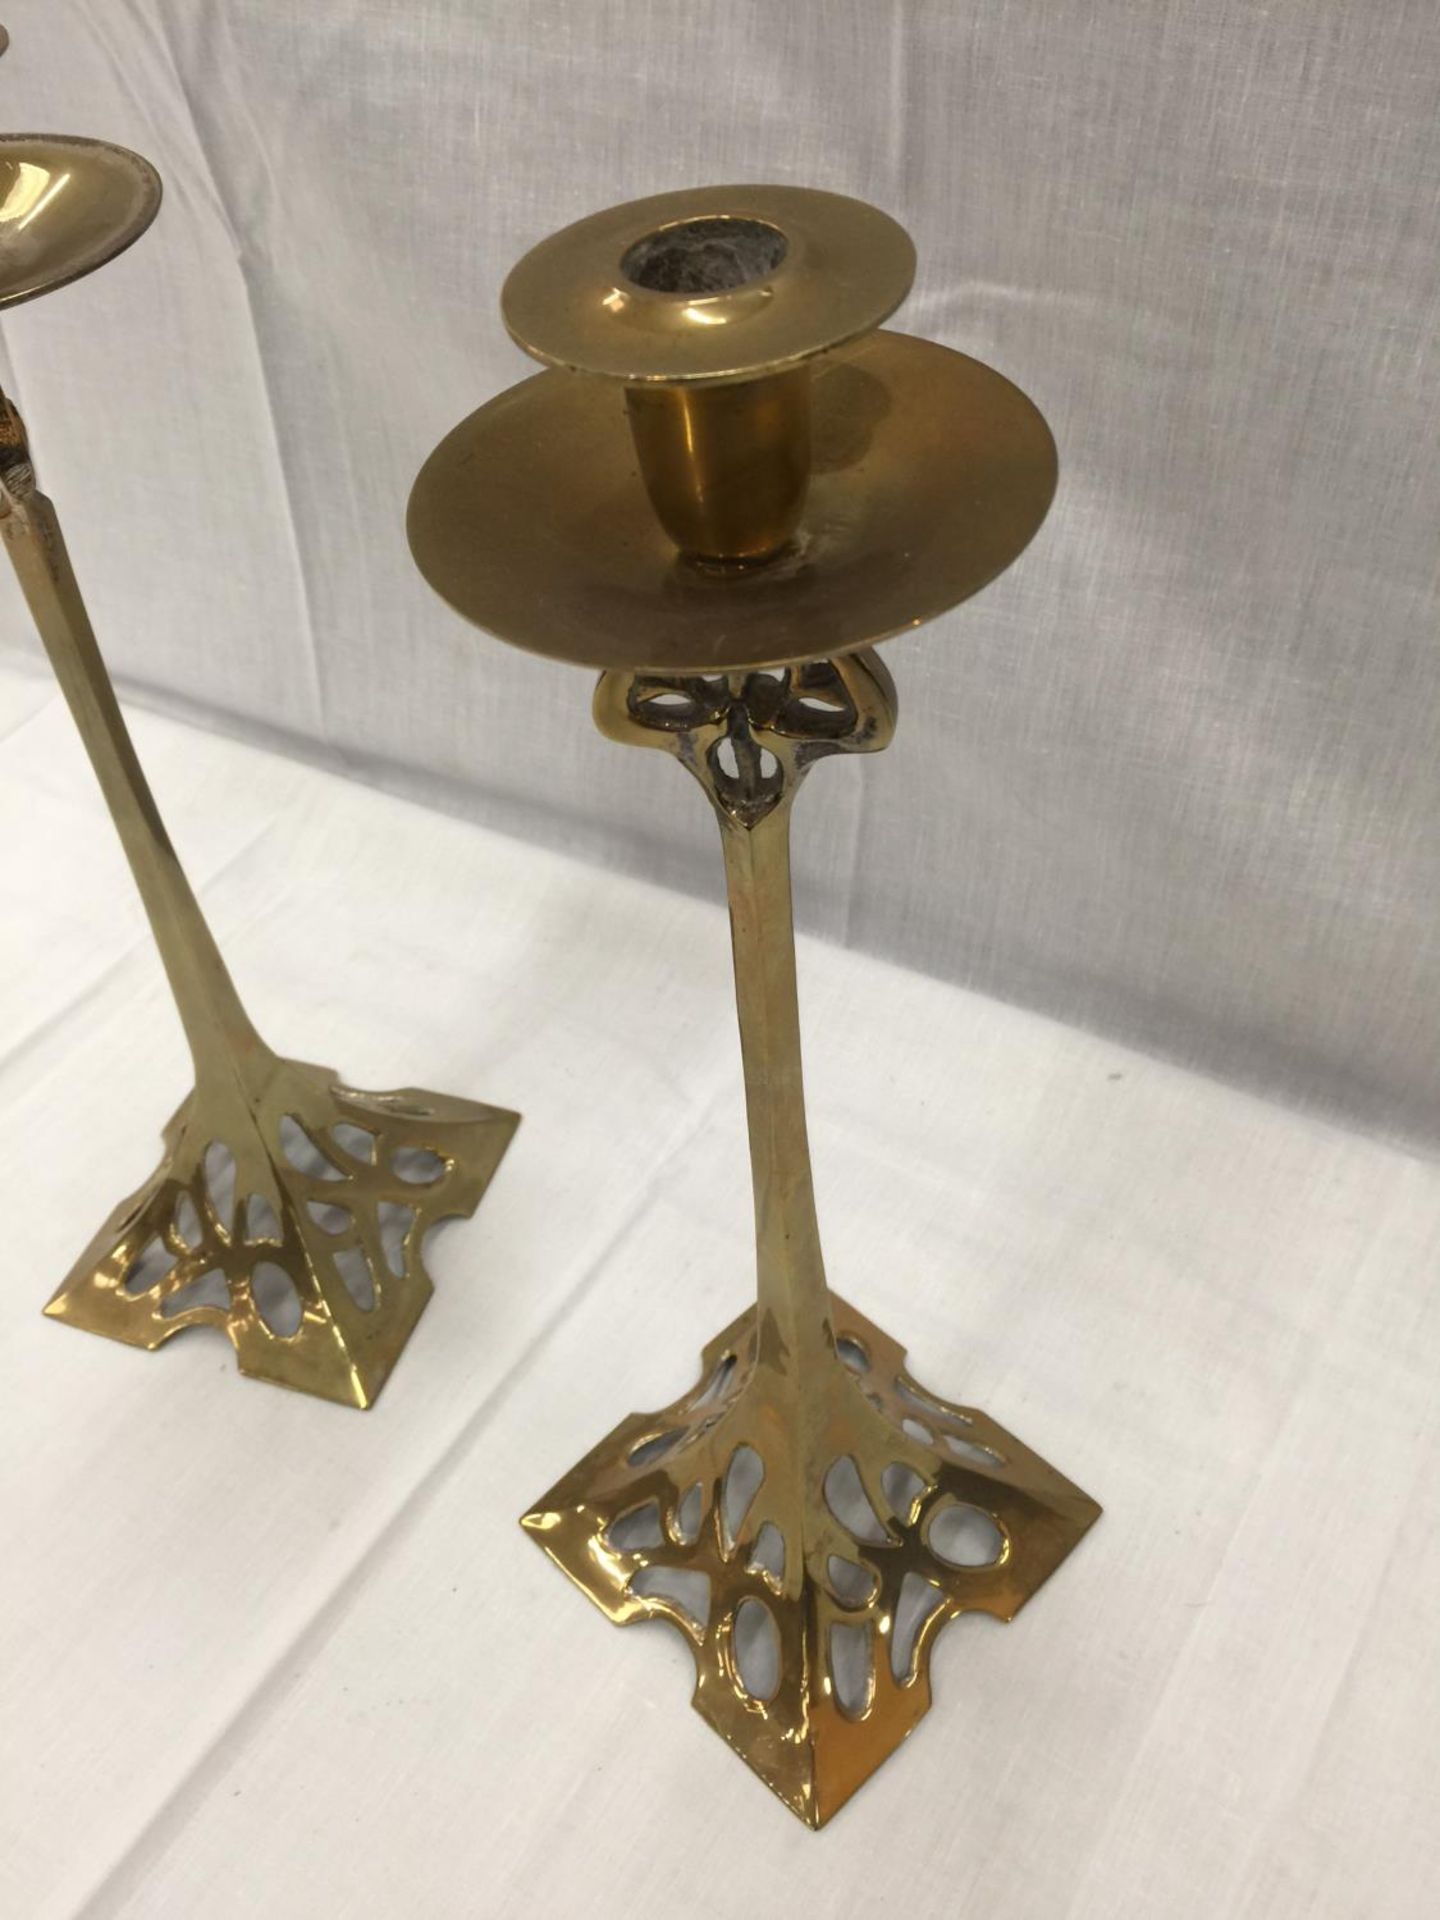 A PAIR OF TALL BRASS ARTS & CRAFTS STYLE CANDLESTICKS 38CM TALL - Image 3 of 3